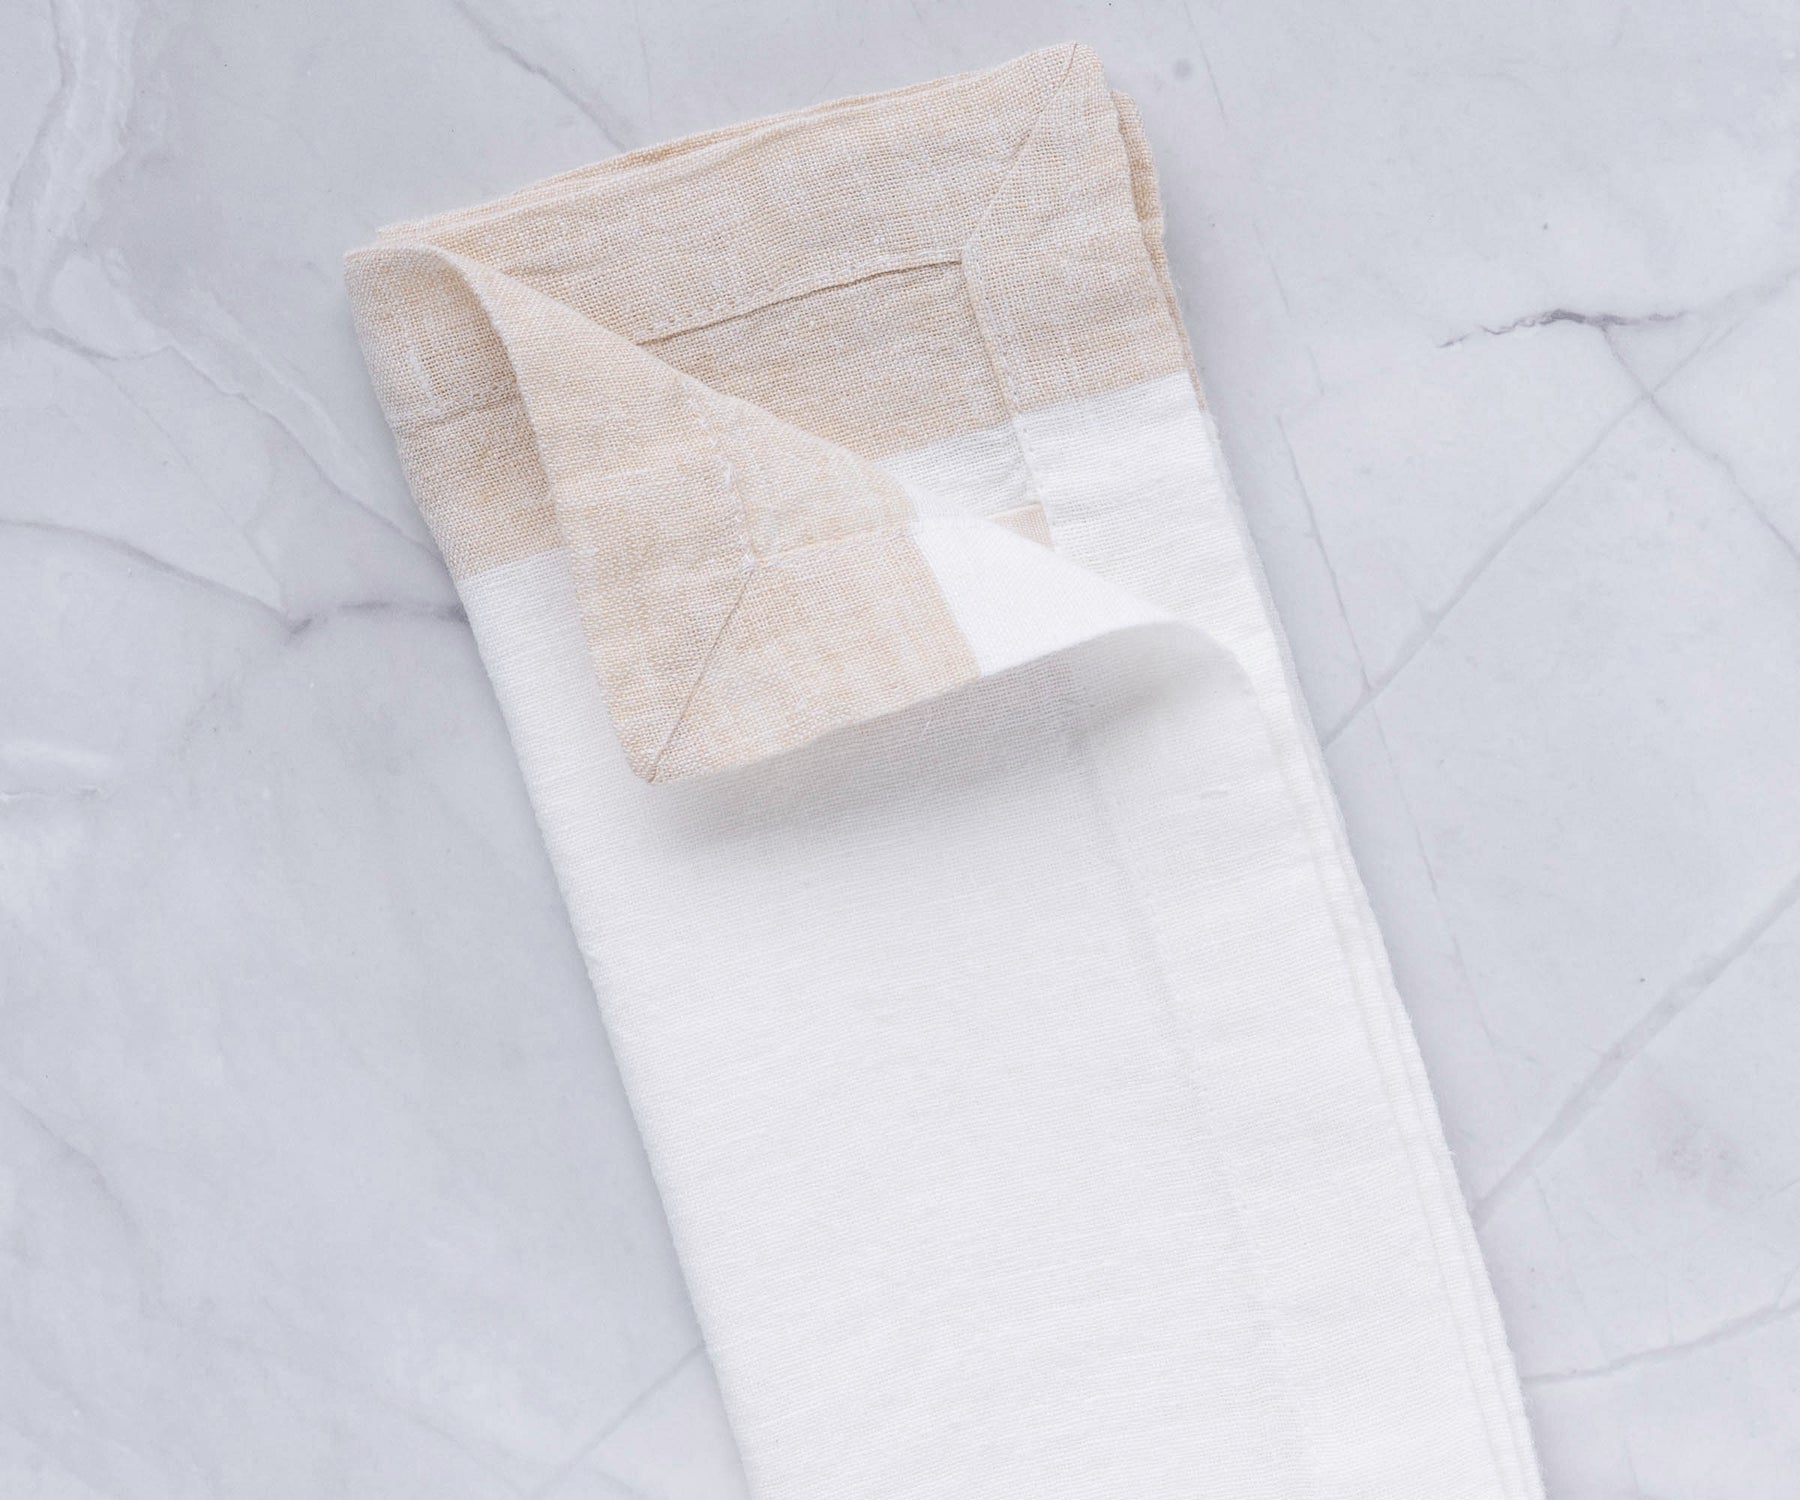 We offer a selection of cloth napkins for your table setting needs. Choose the perfect cloth napkin to complement your dining style. Looking to stock up? Check out our bulk options for cloth napkins.